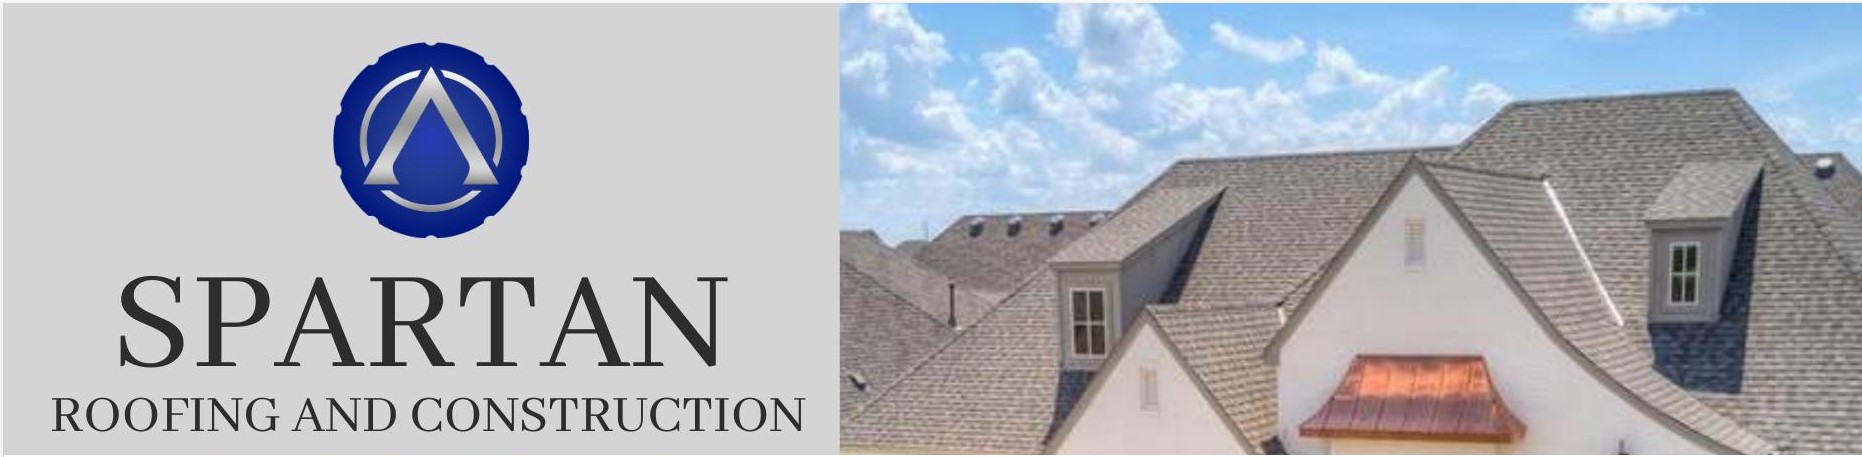 Spartan Roofing and Construction Inc.